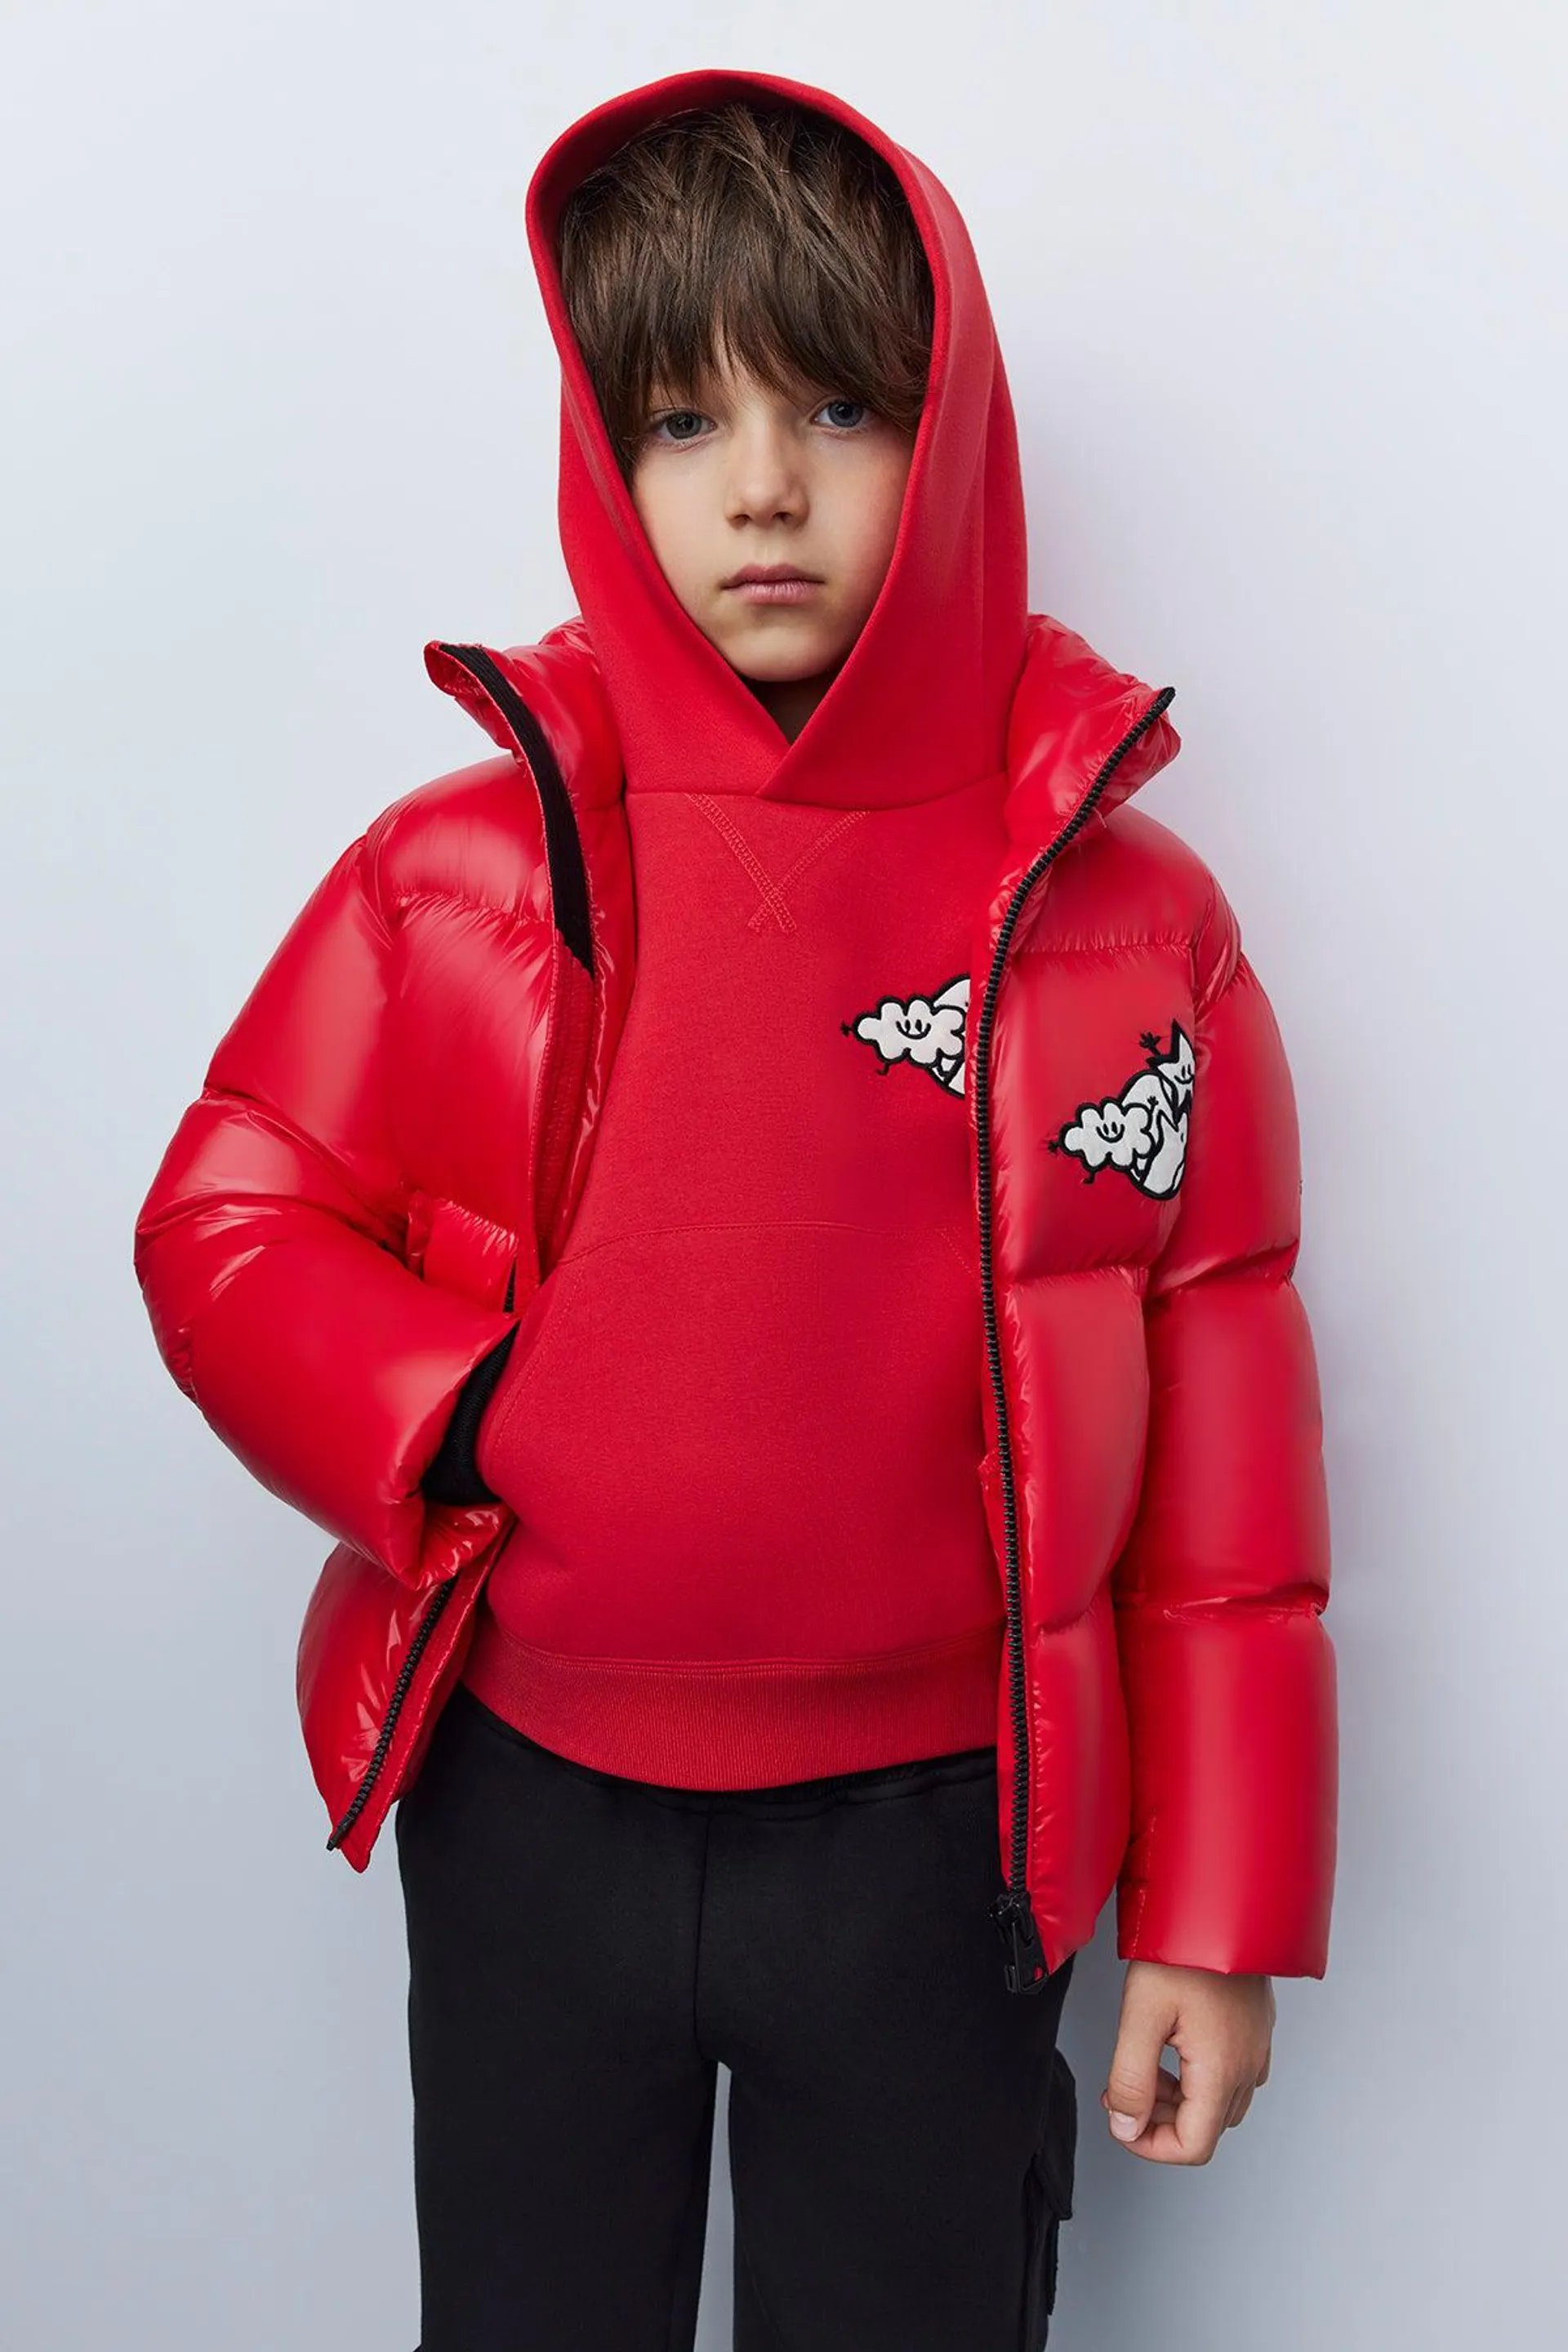 DRU-ML Double-face jersey hoodie for kids (8-14 years)